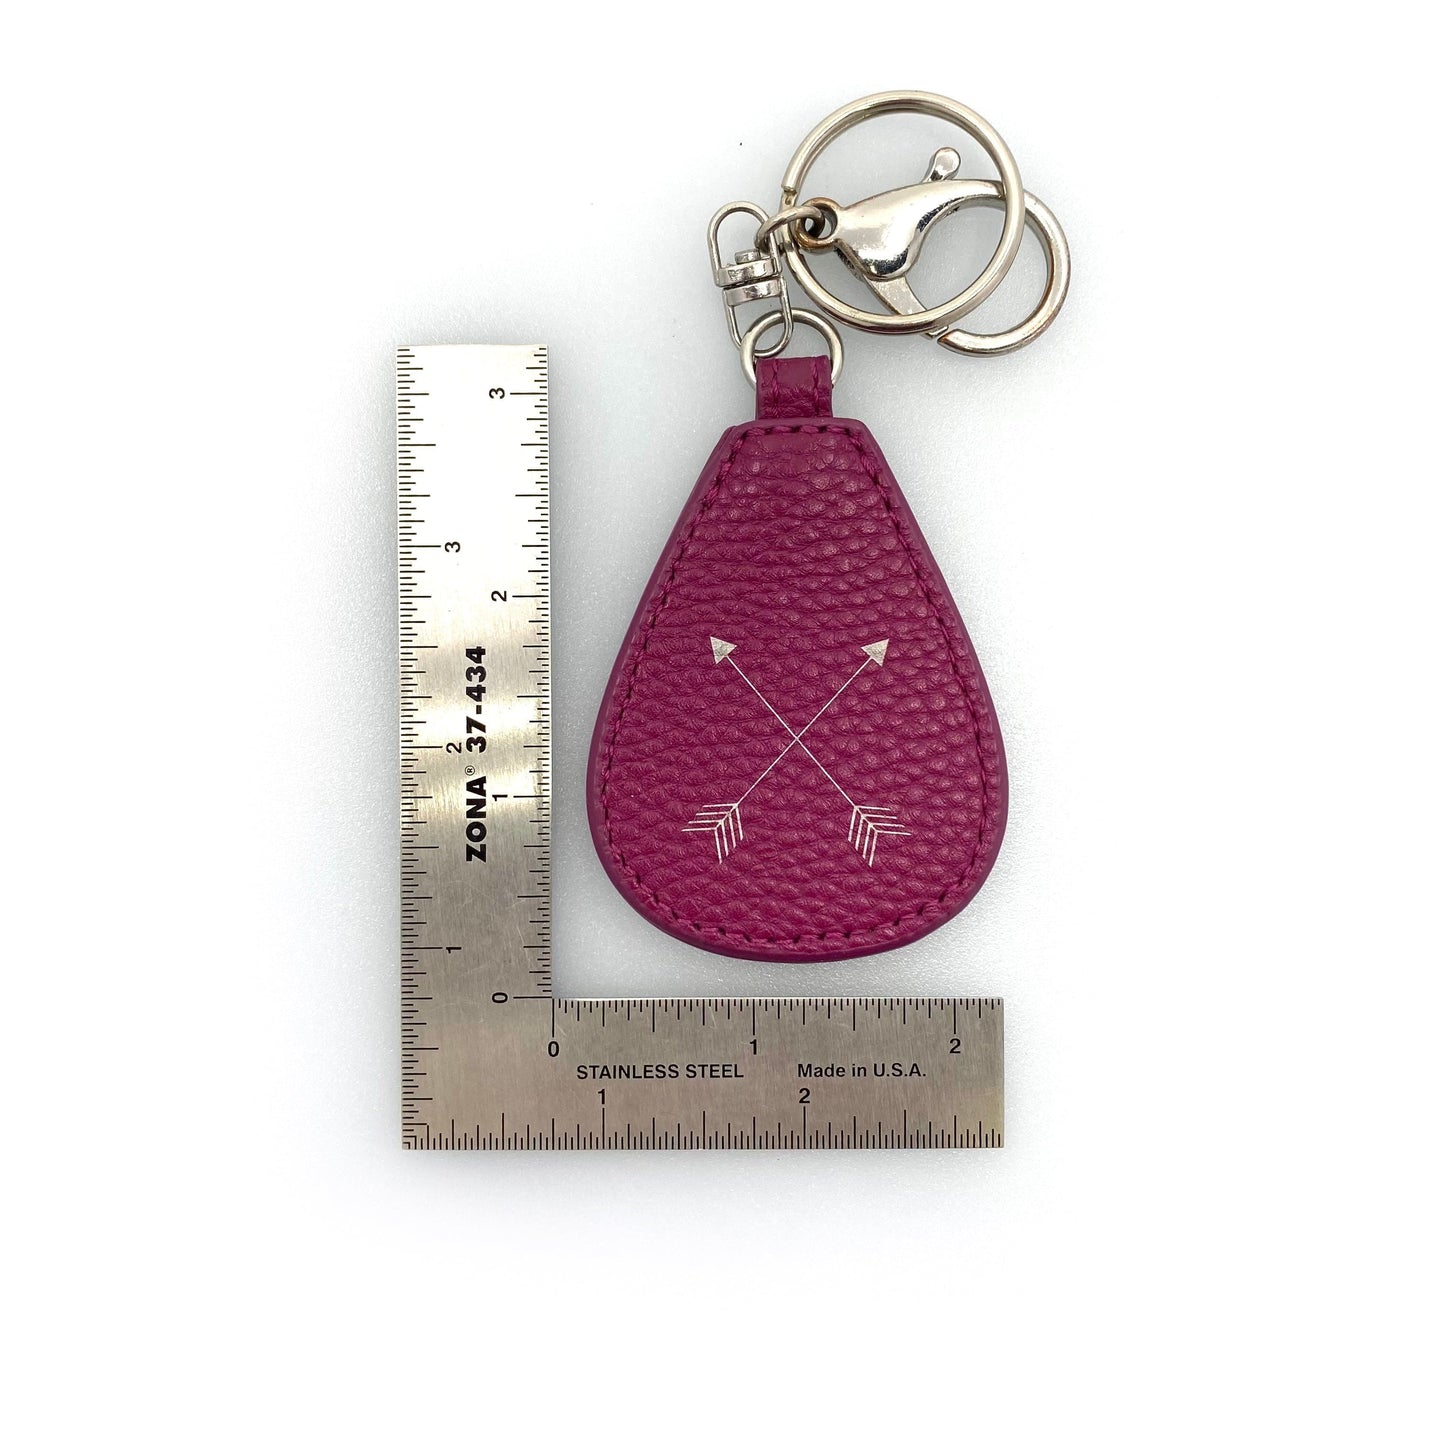 Jewell By Thirty One AG76 Burgundy Purple Crushed Berry Pebble Keychain Key Ring Tag Charm EUC